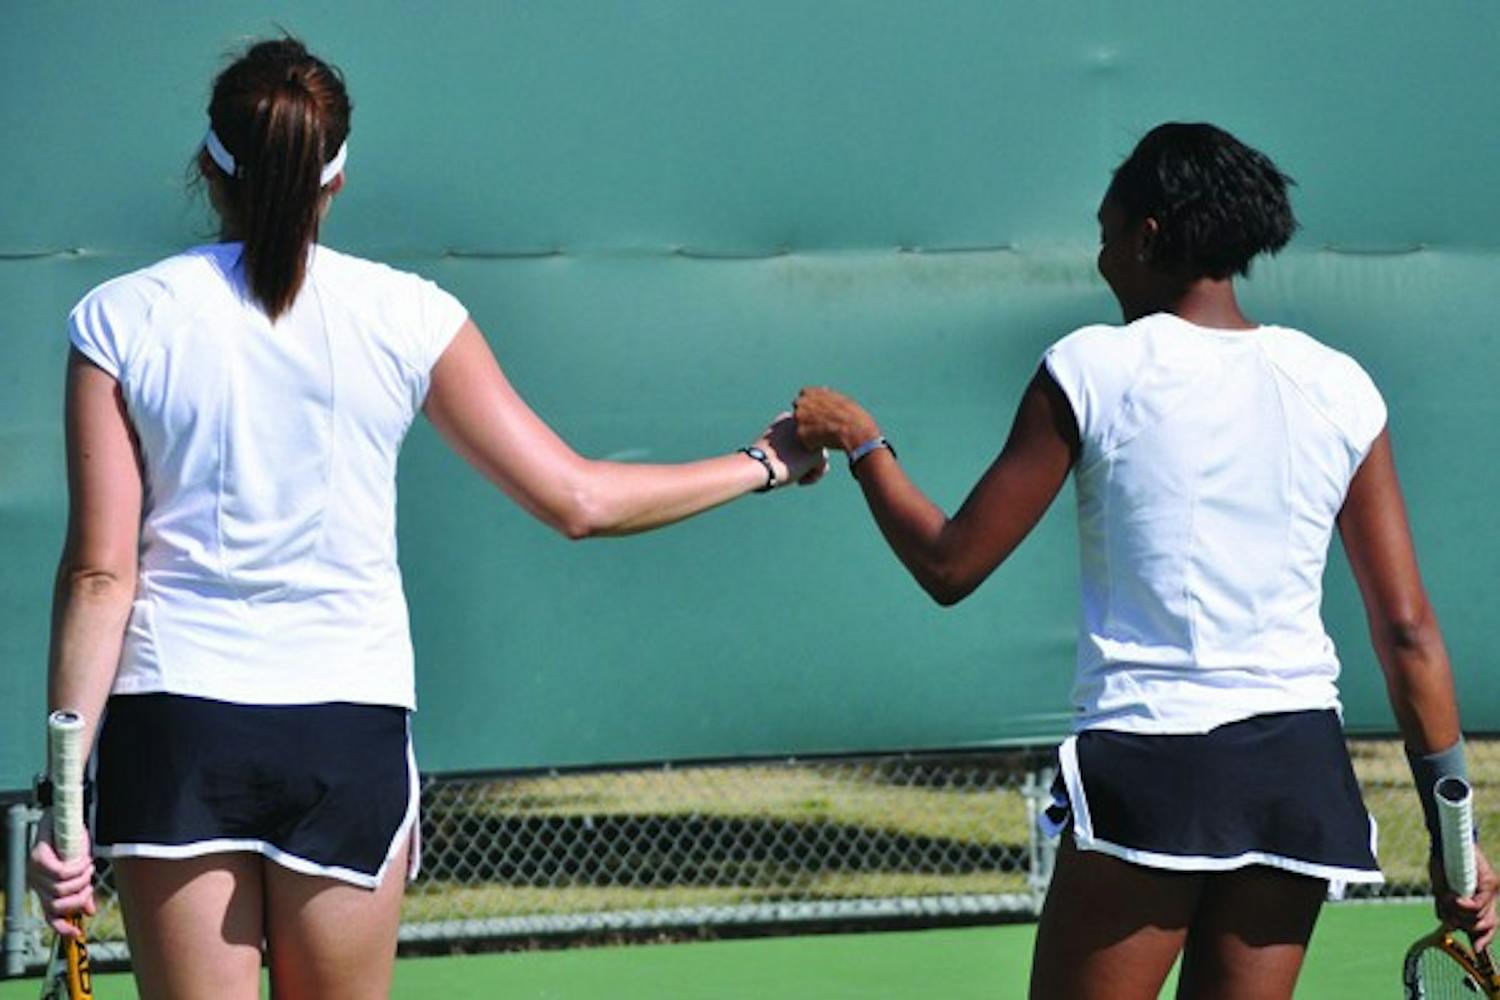 Day-to-day: Undefeated doubles pair senior Ashlee Brown (left) and junior Sianna Simmons bump fists after a point. The Sun Devils are hoping to have senior Kelcy McKenna and junior Michelle Brycki healthy for this weekend’s duals after the pair missed matches last week. (Photo by Sierra Smith)